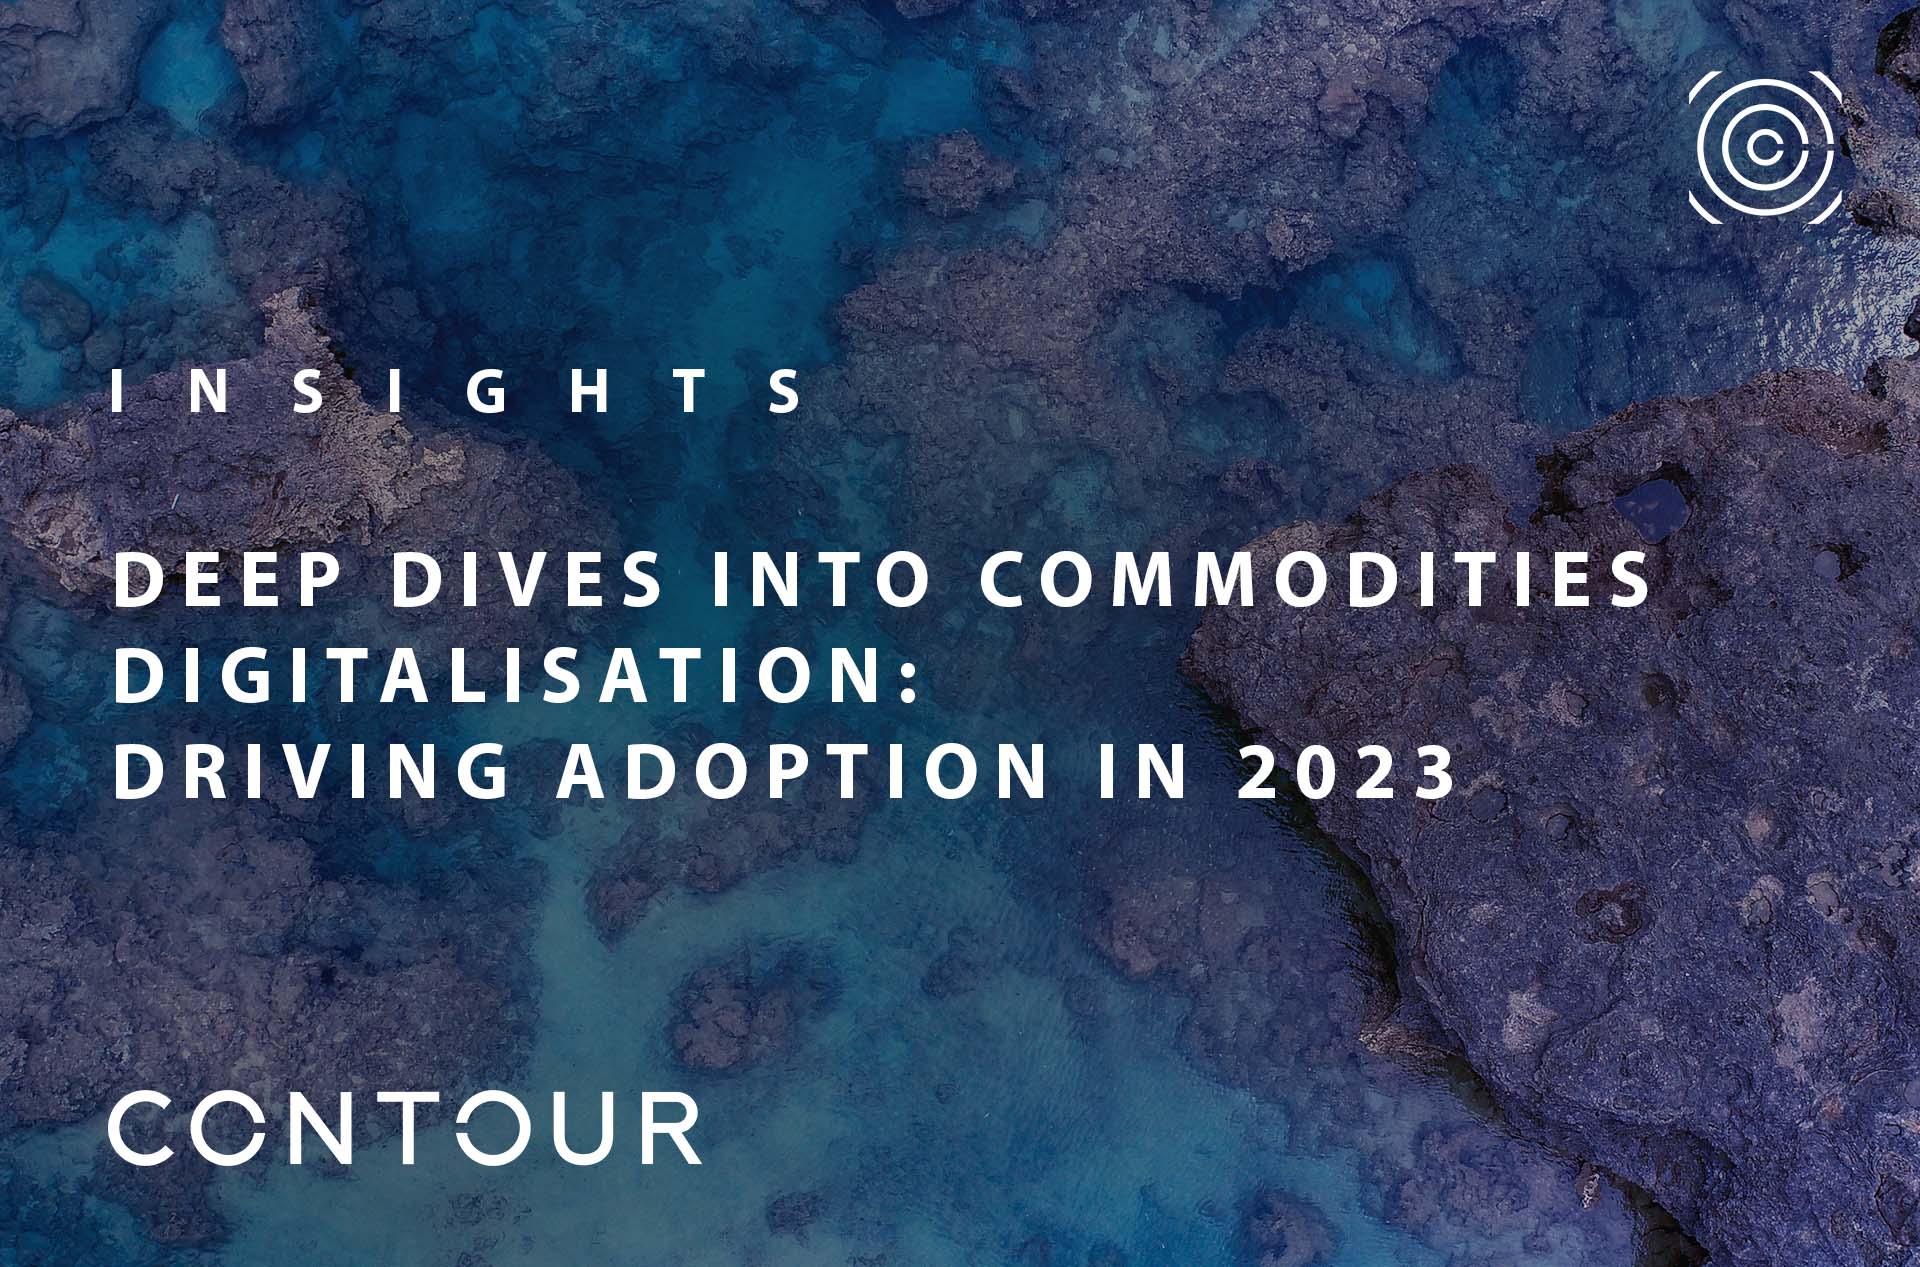 Deep dives into commodities digitalisation: The developments that will drive adoption in 2023